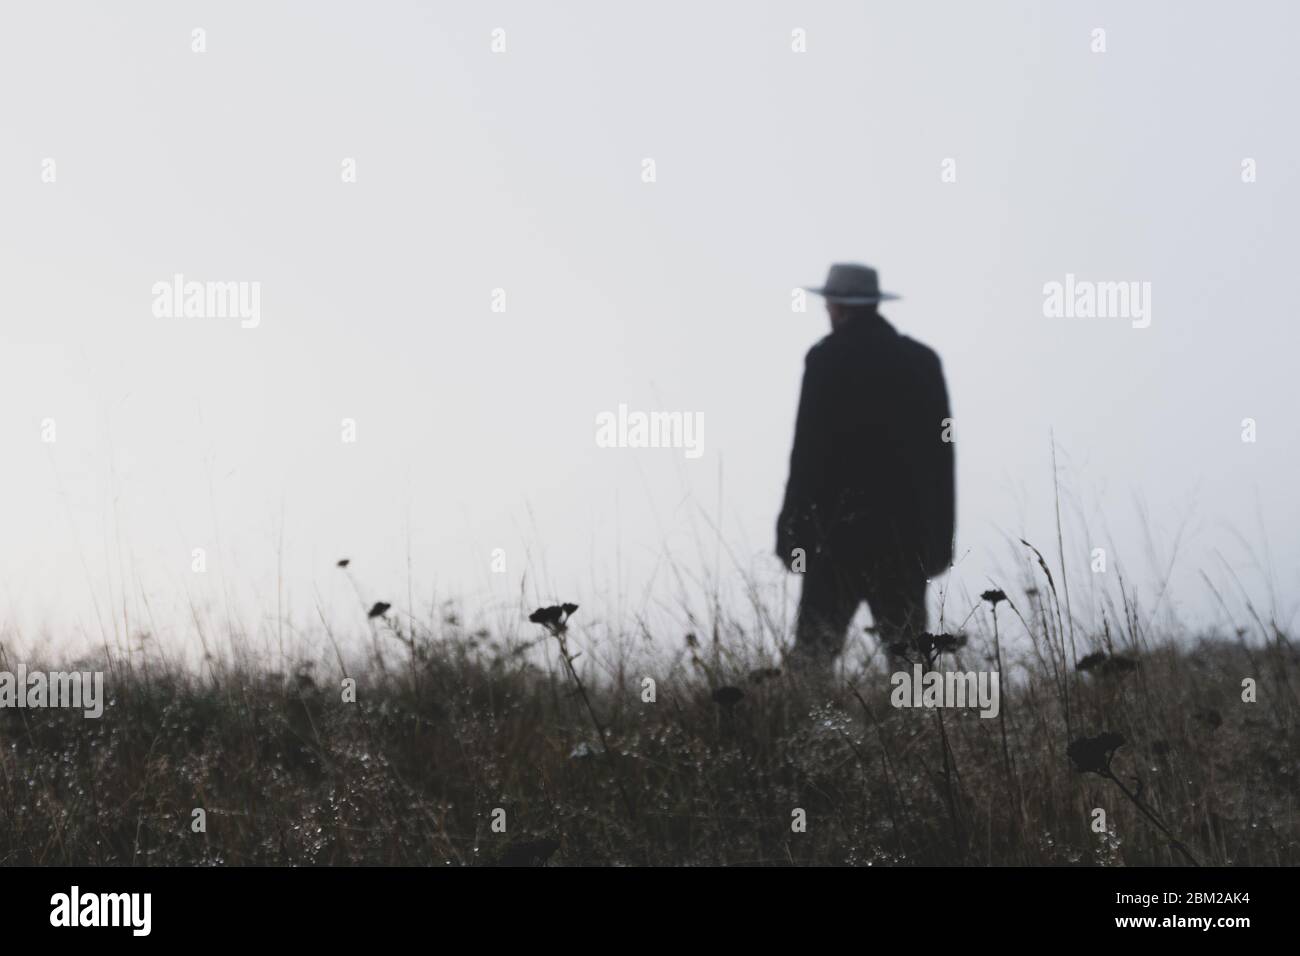 A man wearing a fedora hat standing out of focus on a misty winters day Stock Photo